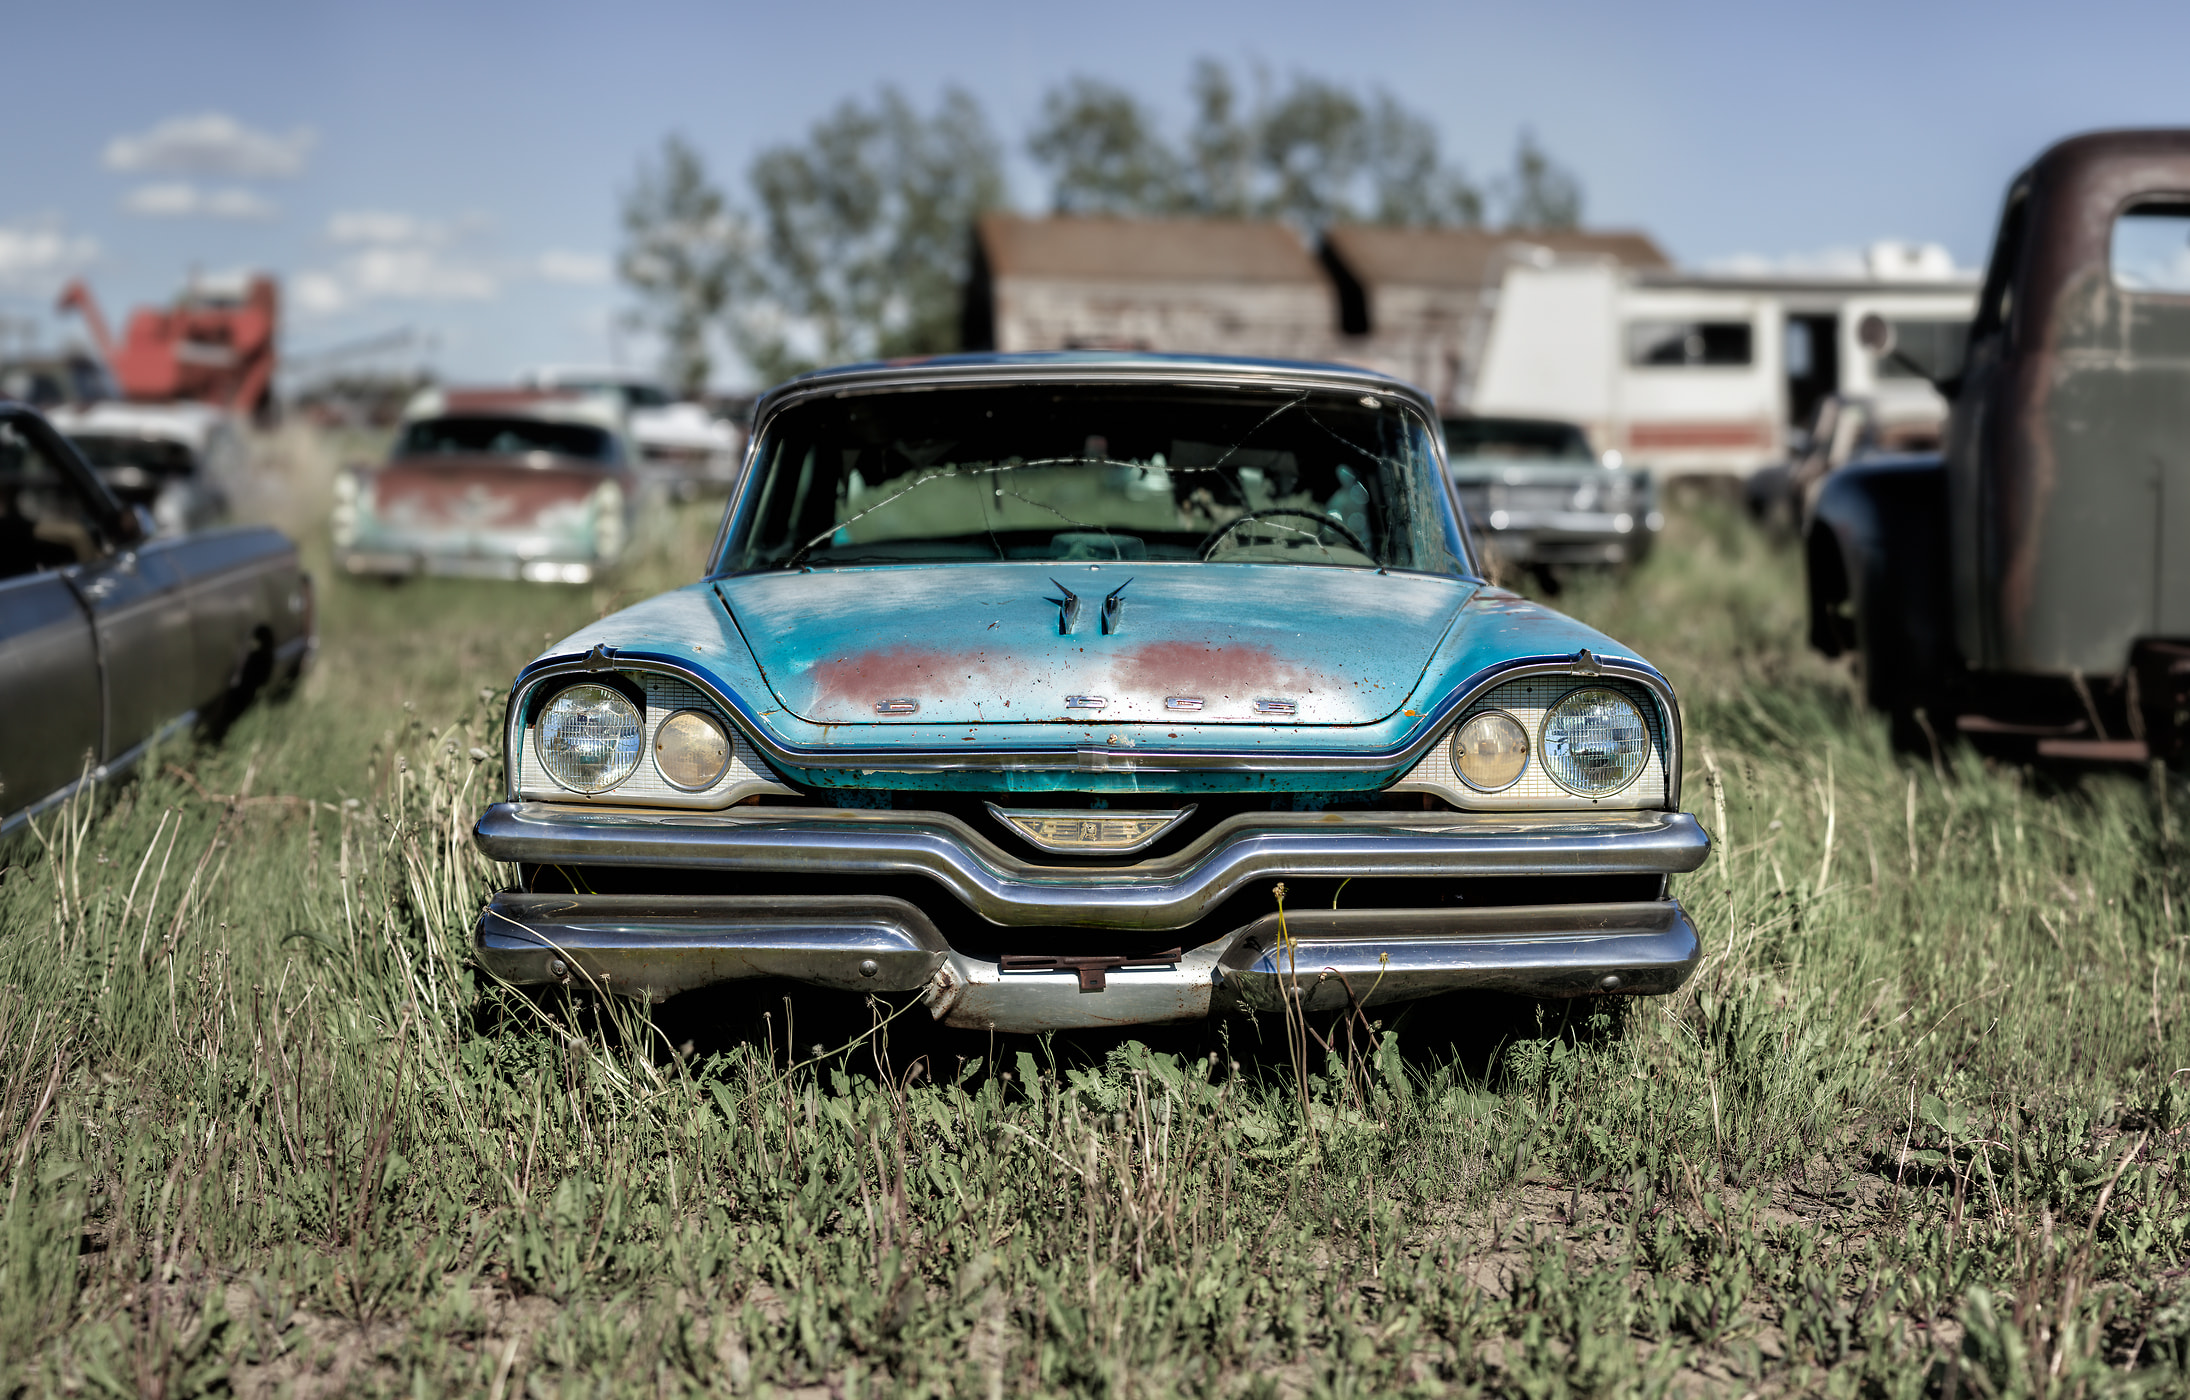 1,282 megapixels! A very high resolution, large-format VAST photo print of an old car; photograph created by Scott Dimond